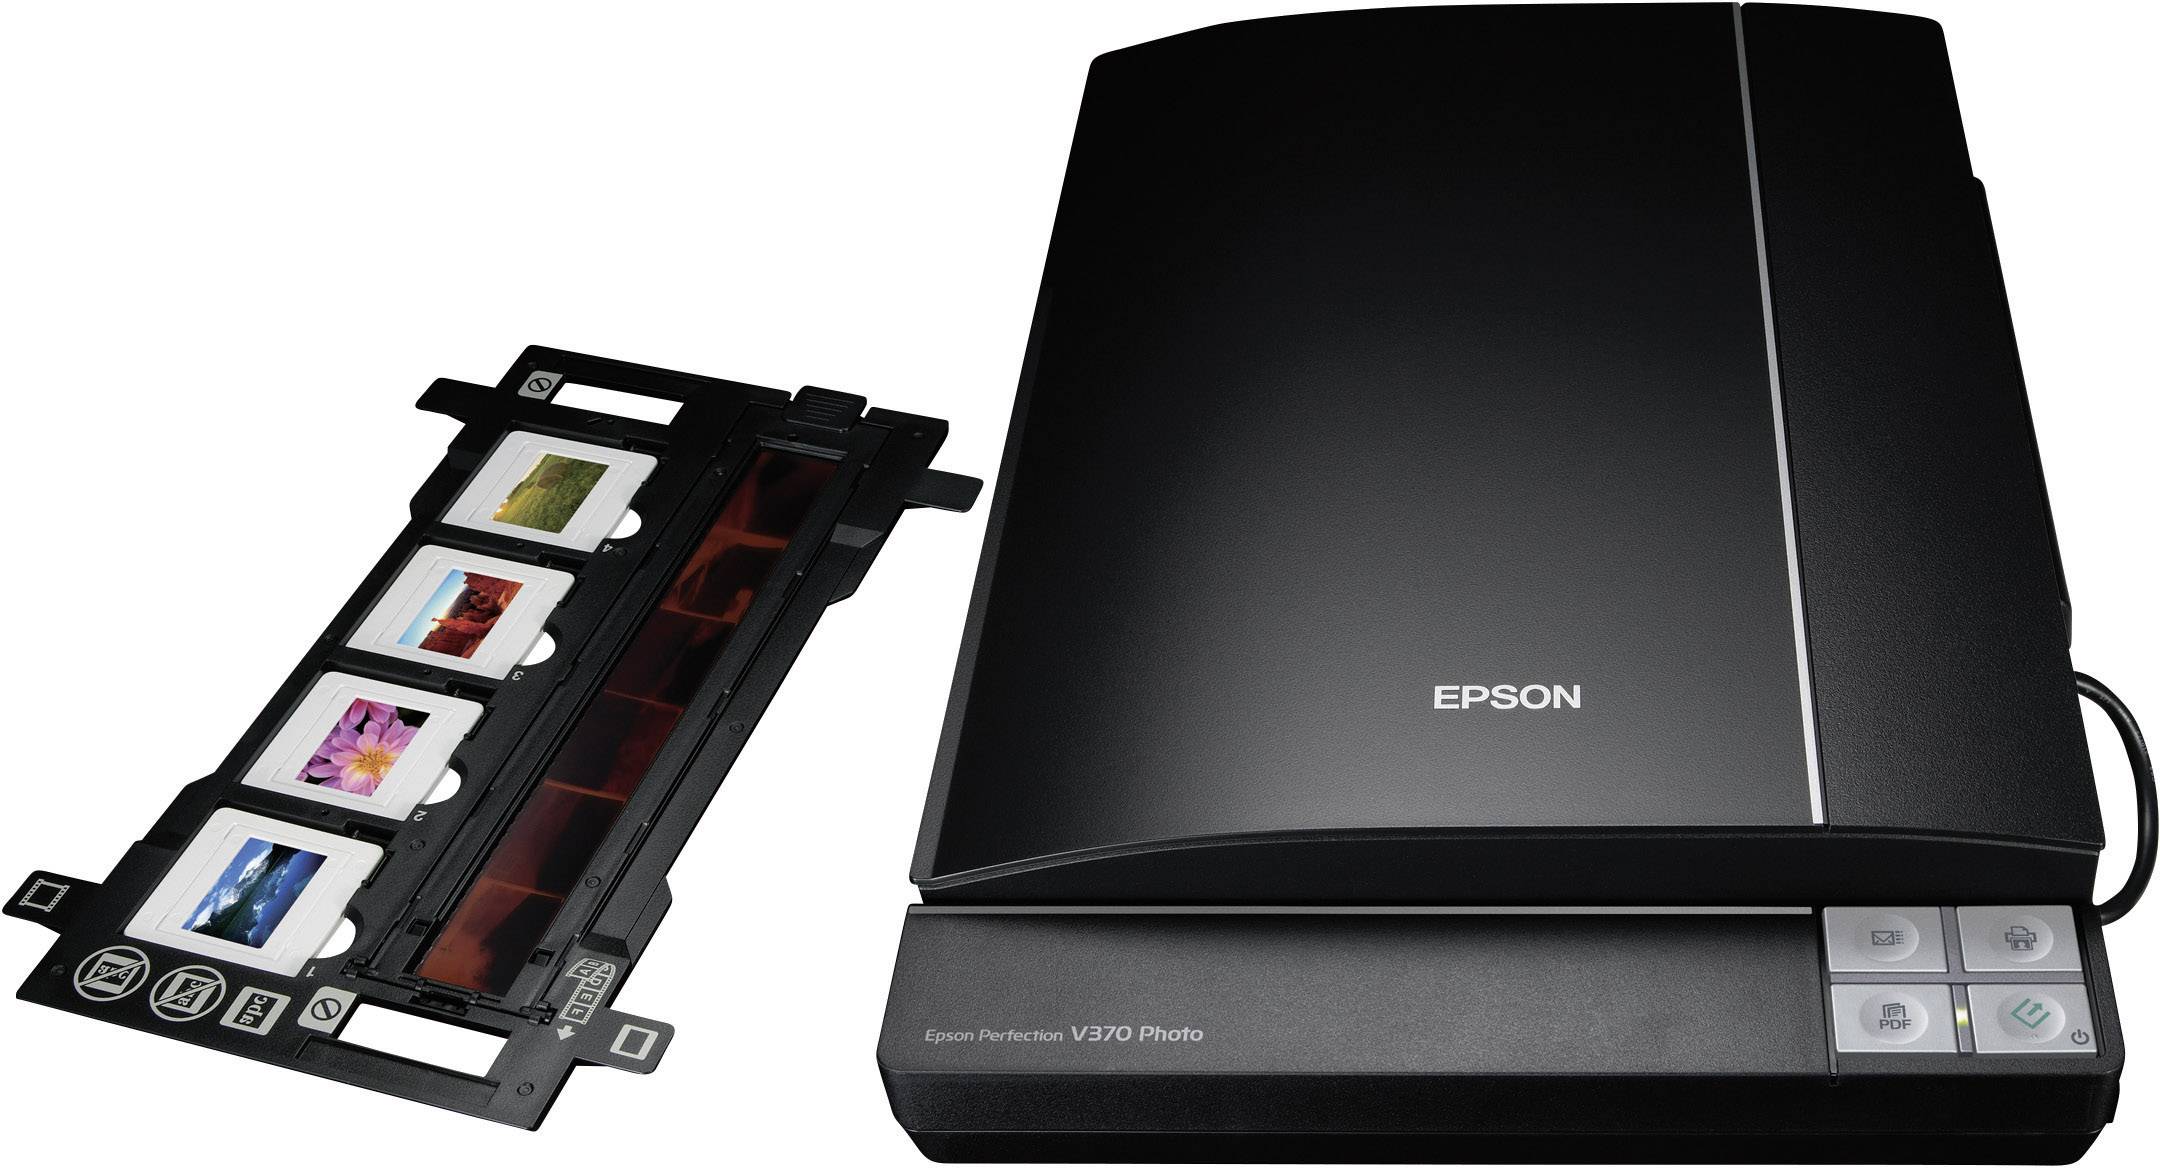 epson perfection v200 photo scanner driver wont unistall